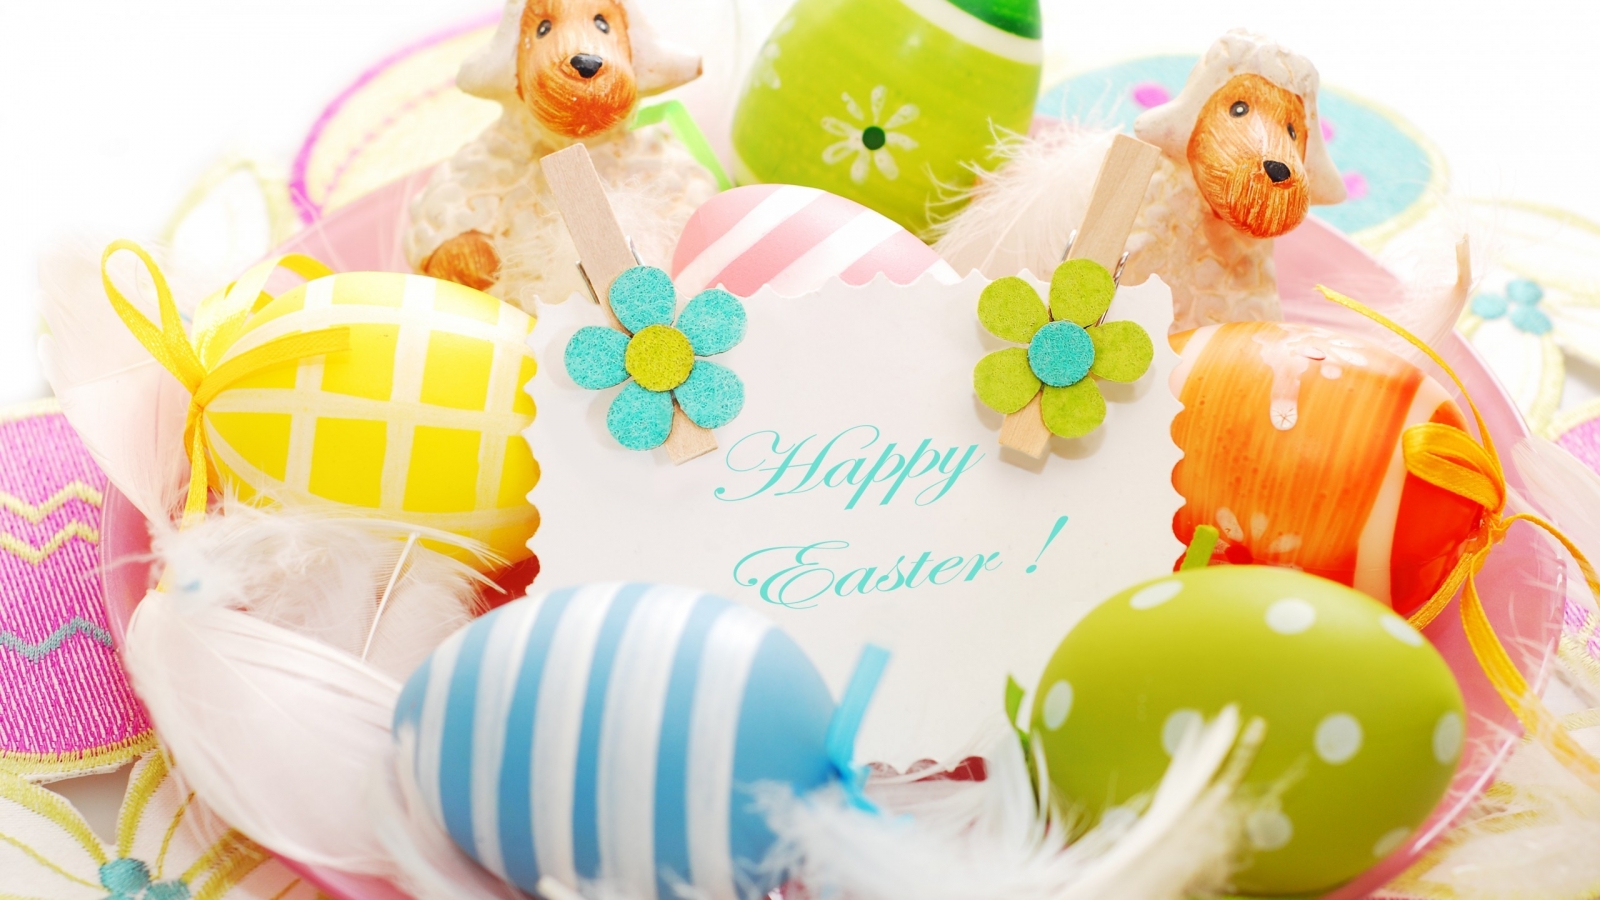 2014 Happy Easter Decorations for 1600 x 900 HDTV resolution